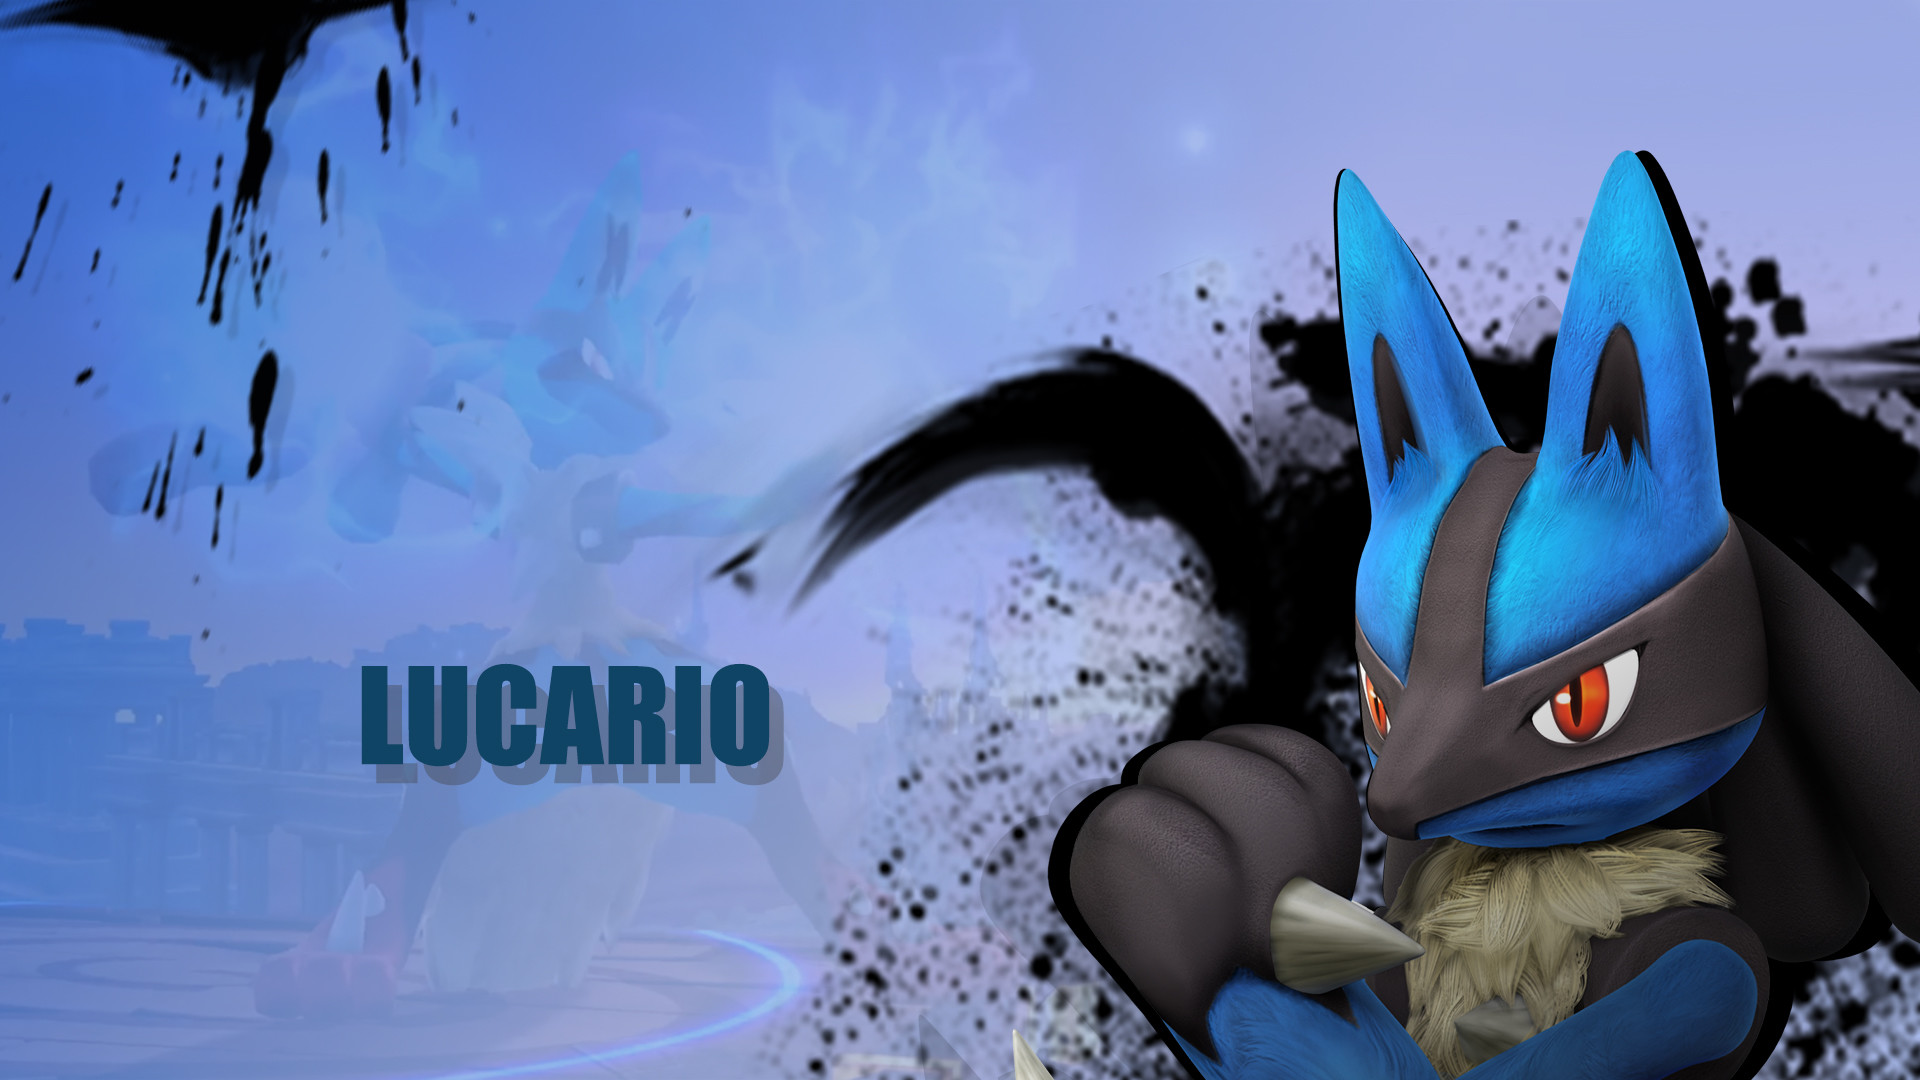 1920x1080 Project Lucario Wallpaper by Ac1dSn0w Project Lucario Wallpaper by Ac1dSn0w